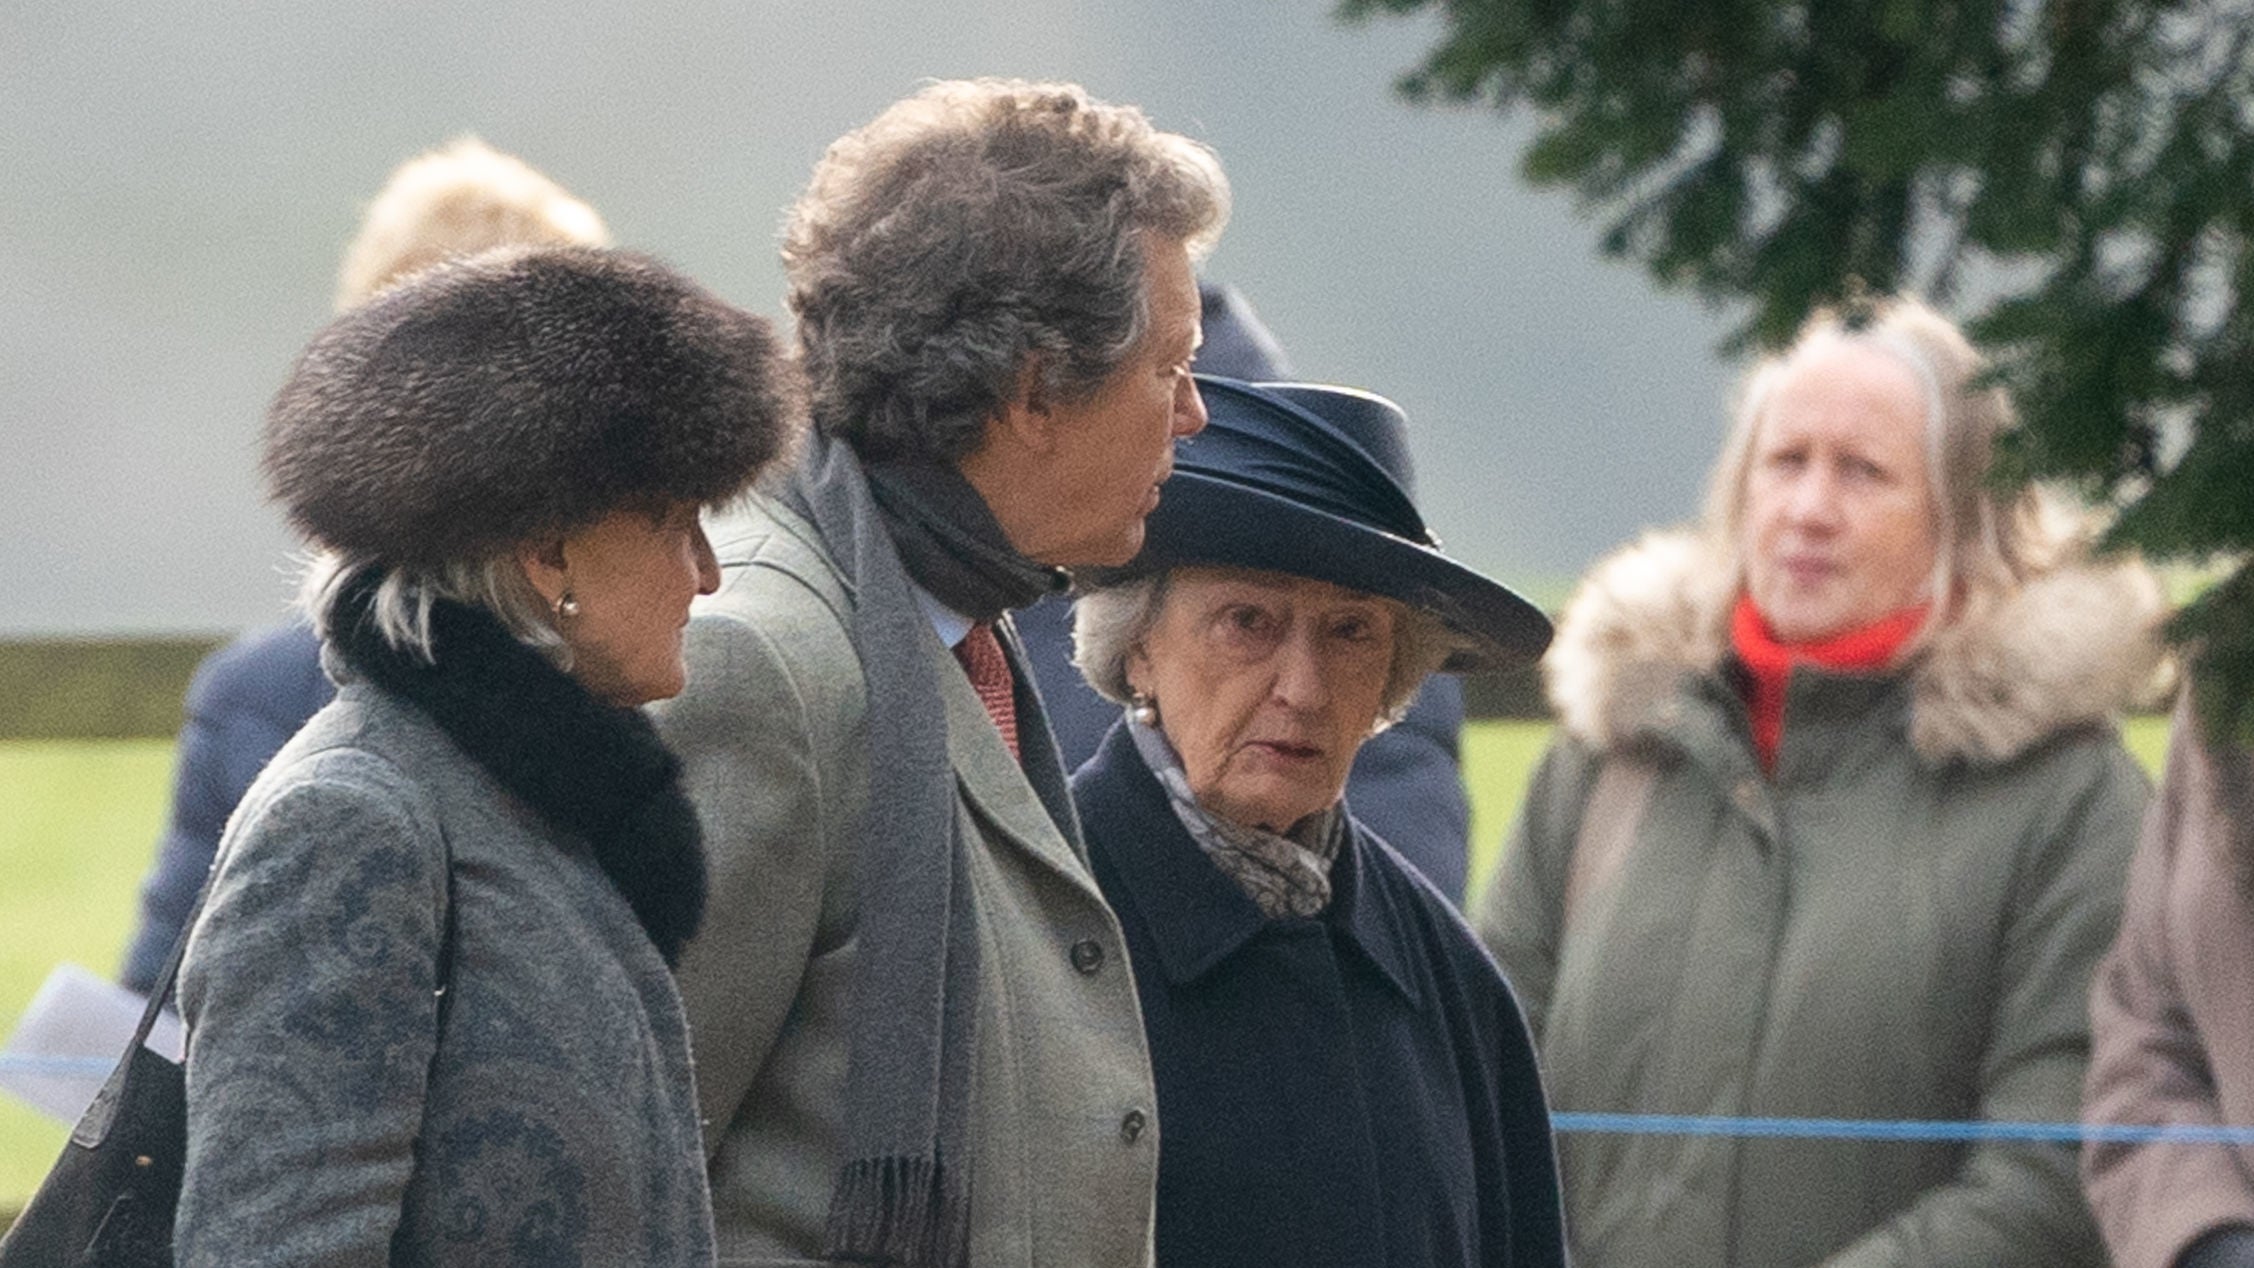 Lady Susan Hussey arrives to attend a church service with King Charles III and the Princess Royal at St Mary Magdalene Church in Sandringham